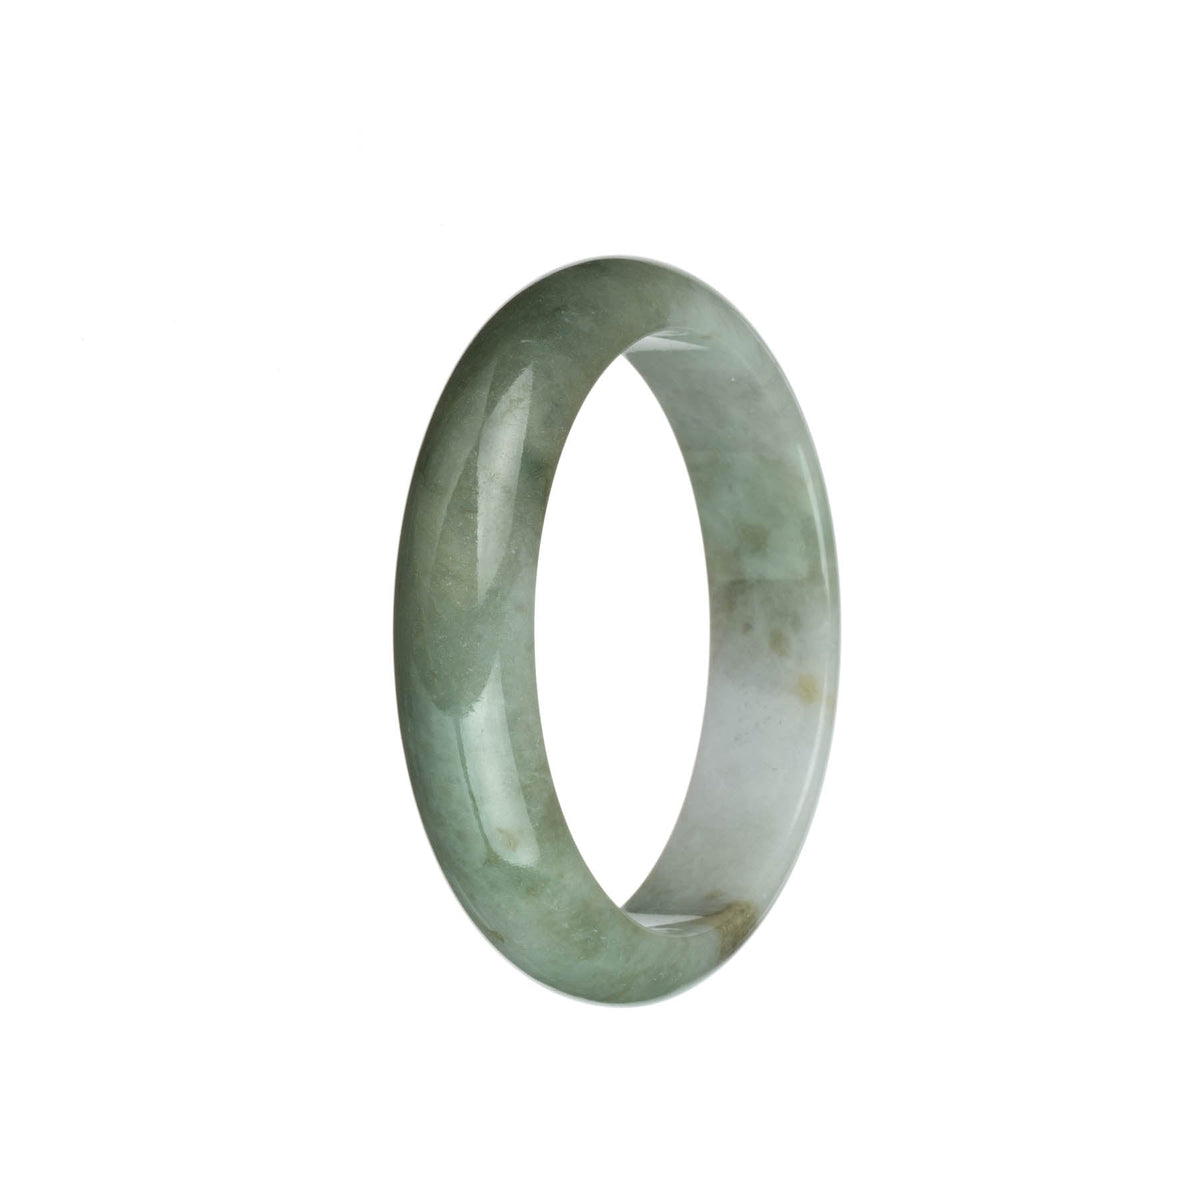 Genuine Grade A White and Green with Brown Spots Burmese Jade Bangle - 58mm Half Moon